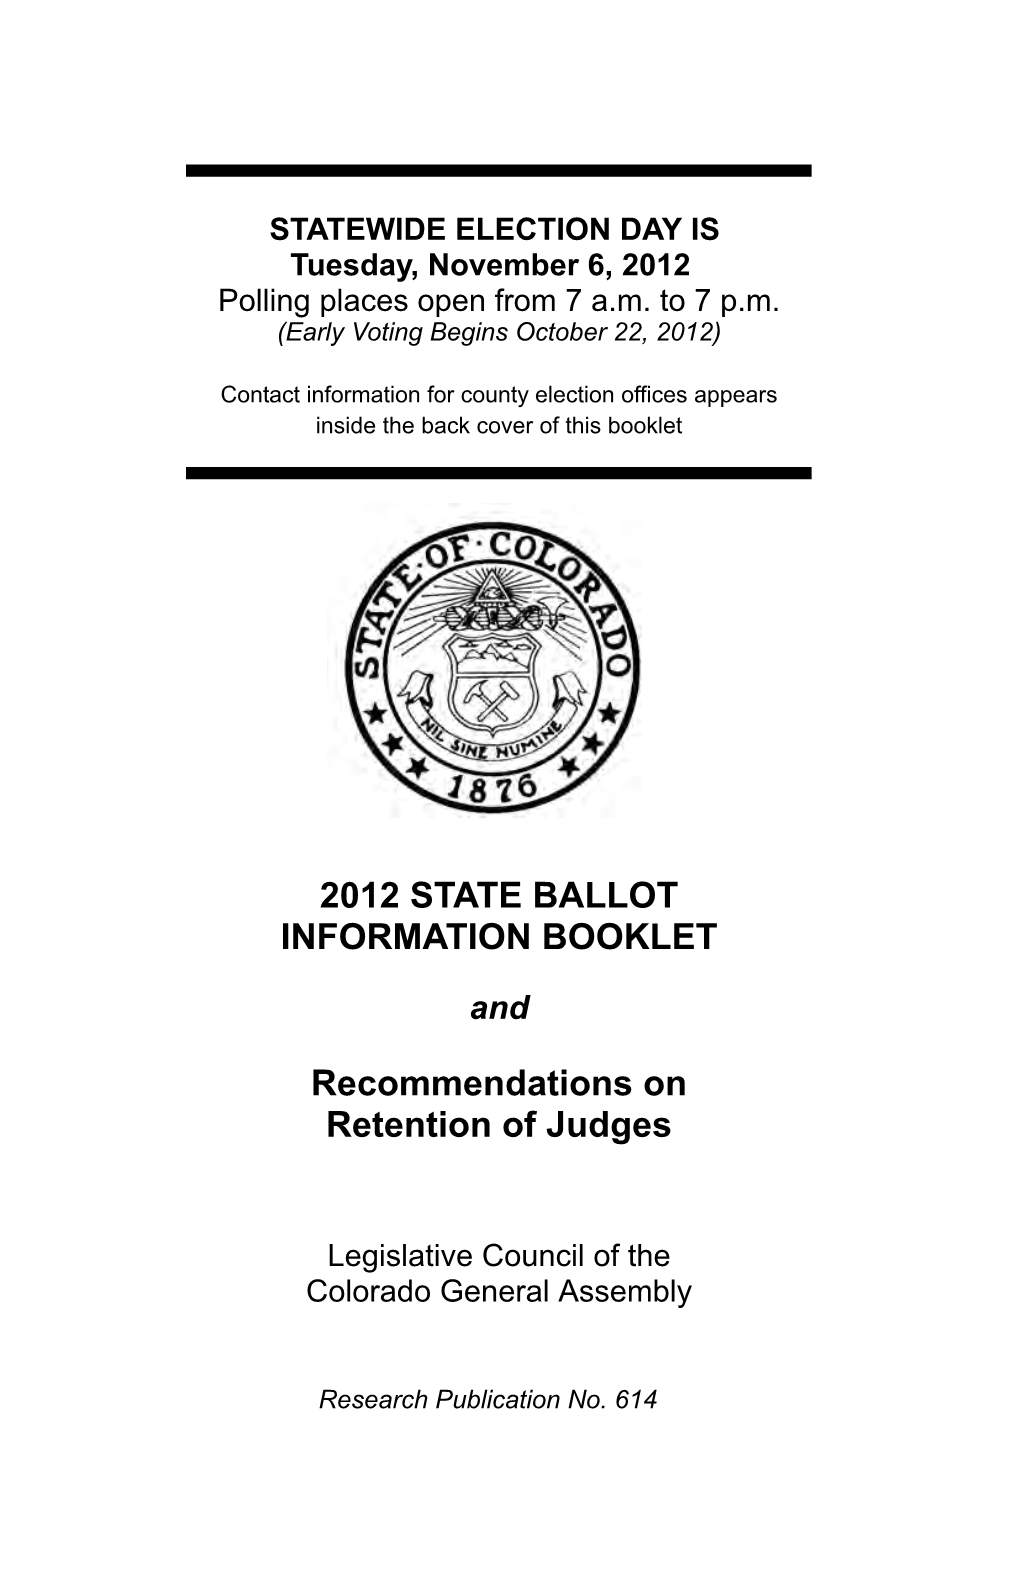 2012 STATE BALLOT INFORMATION BOOKLET Recommendations